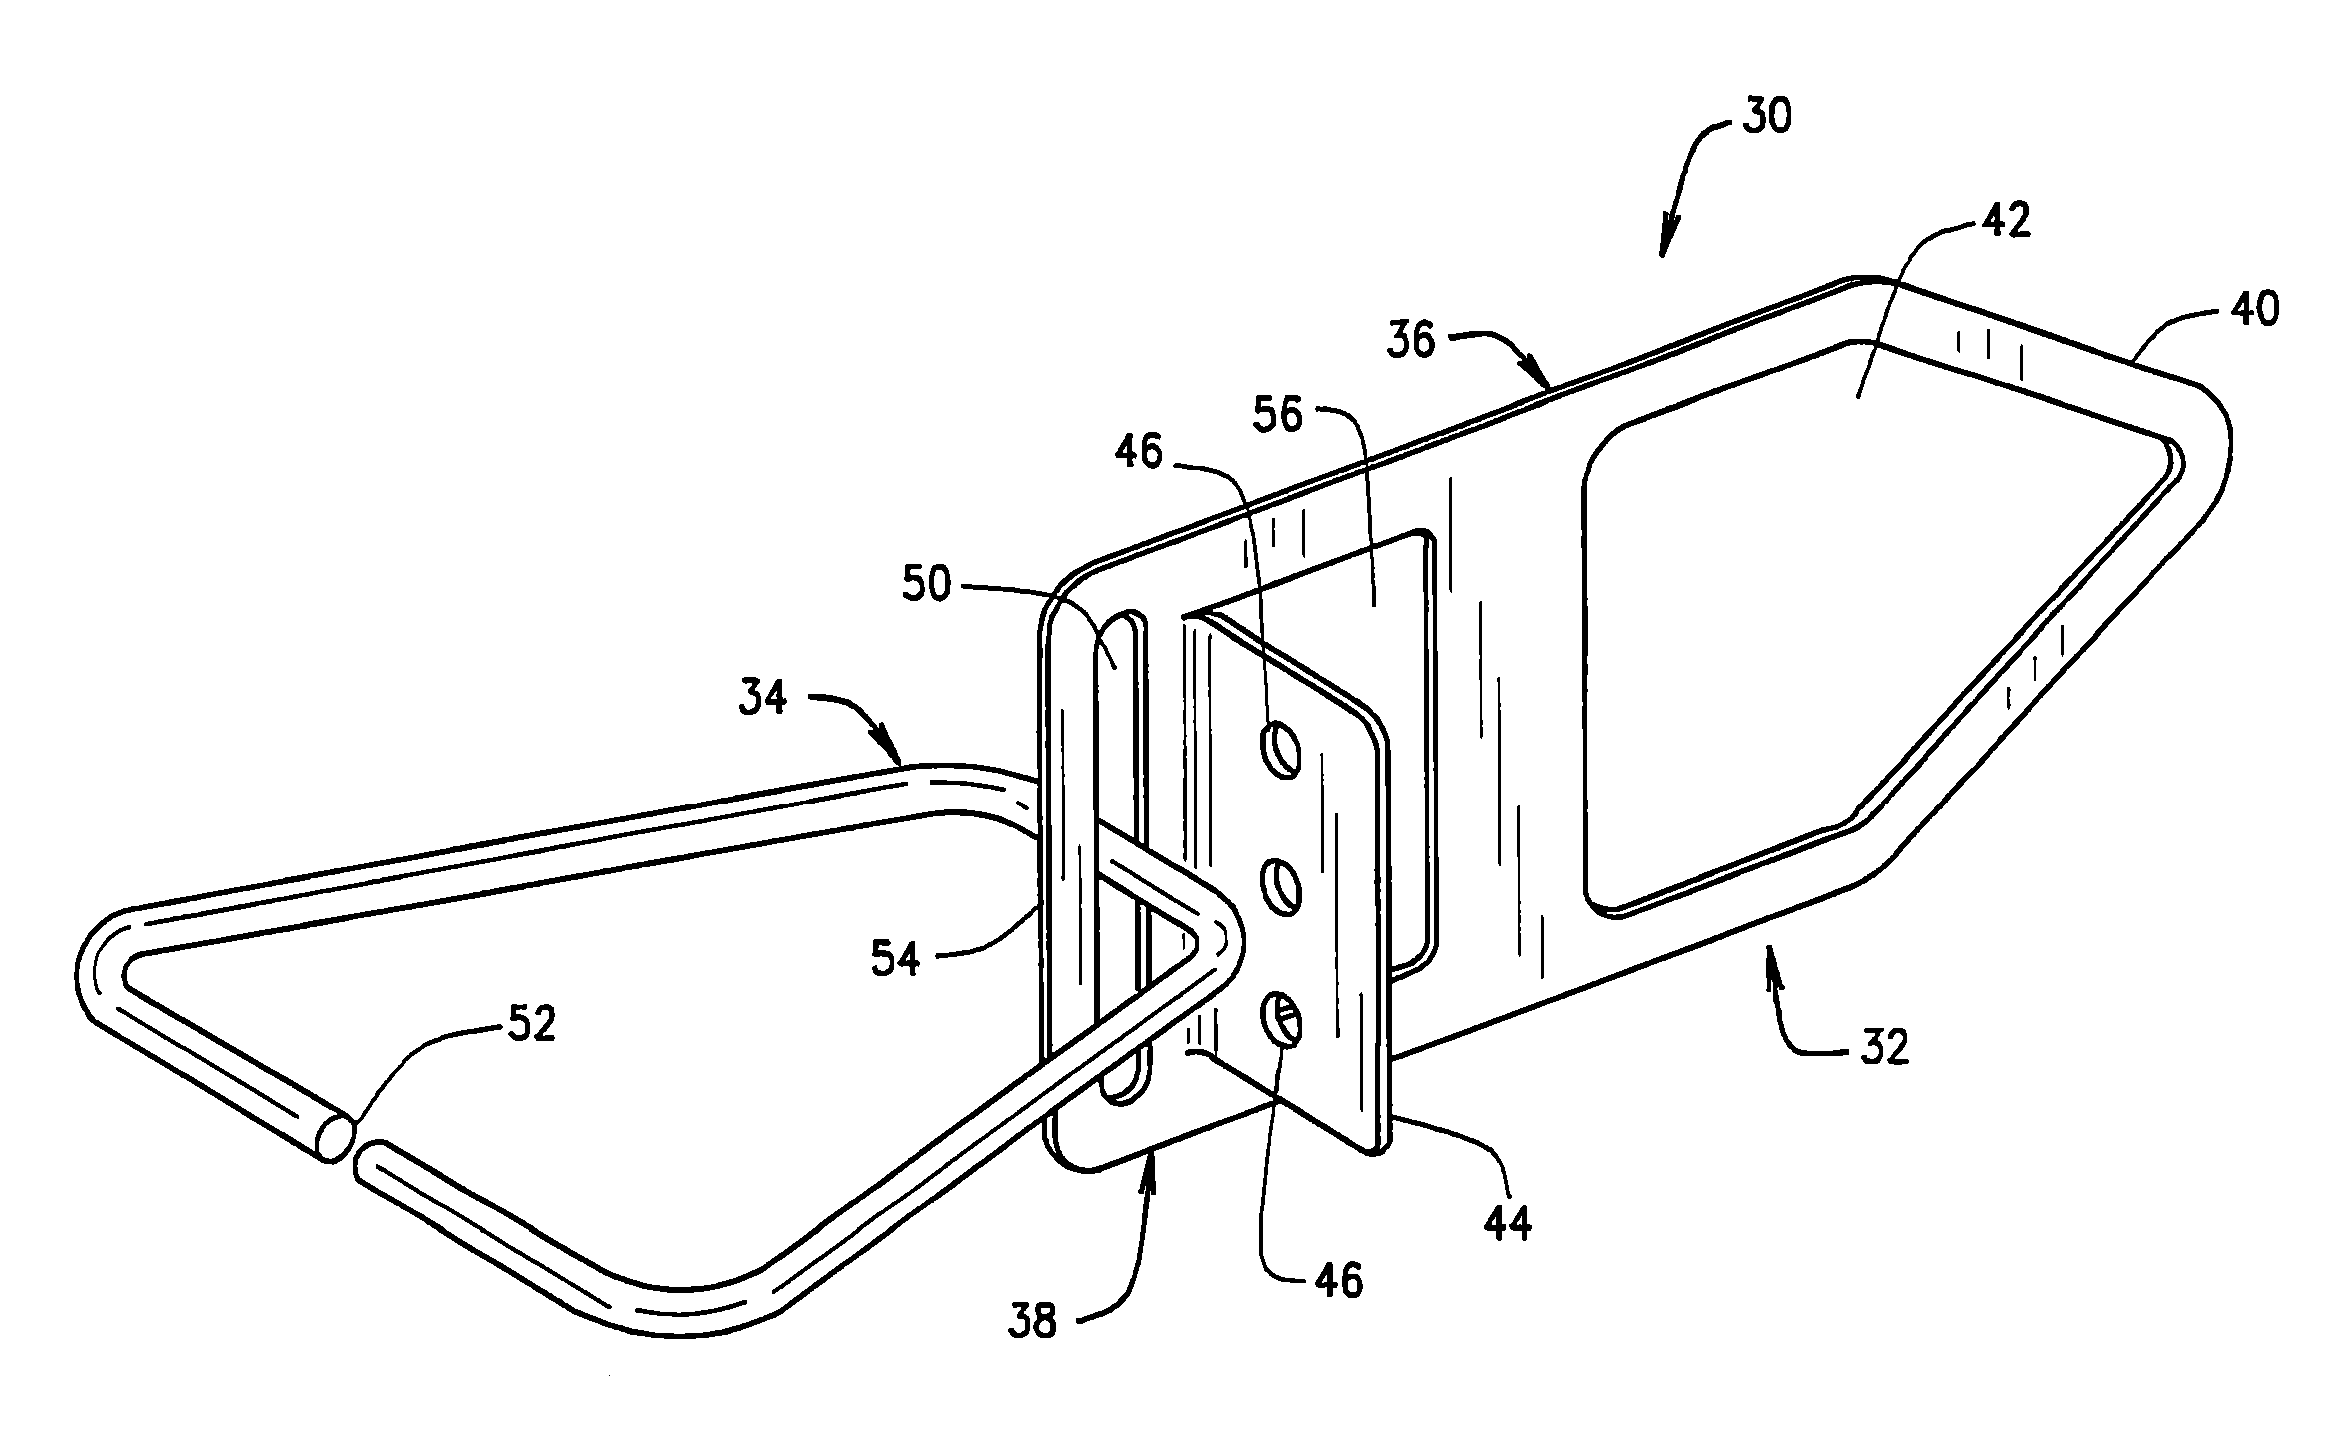 Adjustable masonry anchor assembly for use with insulating concrete form systems